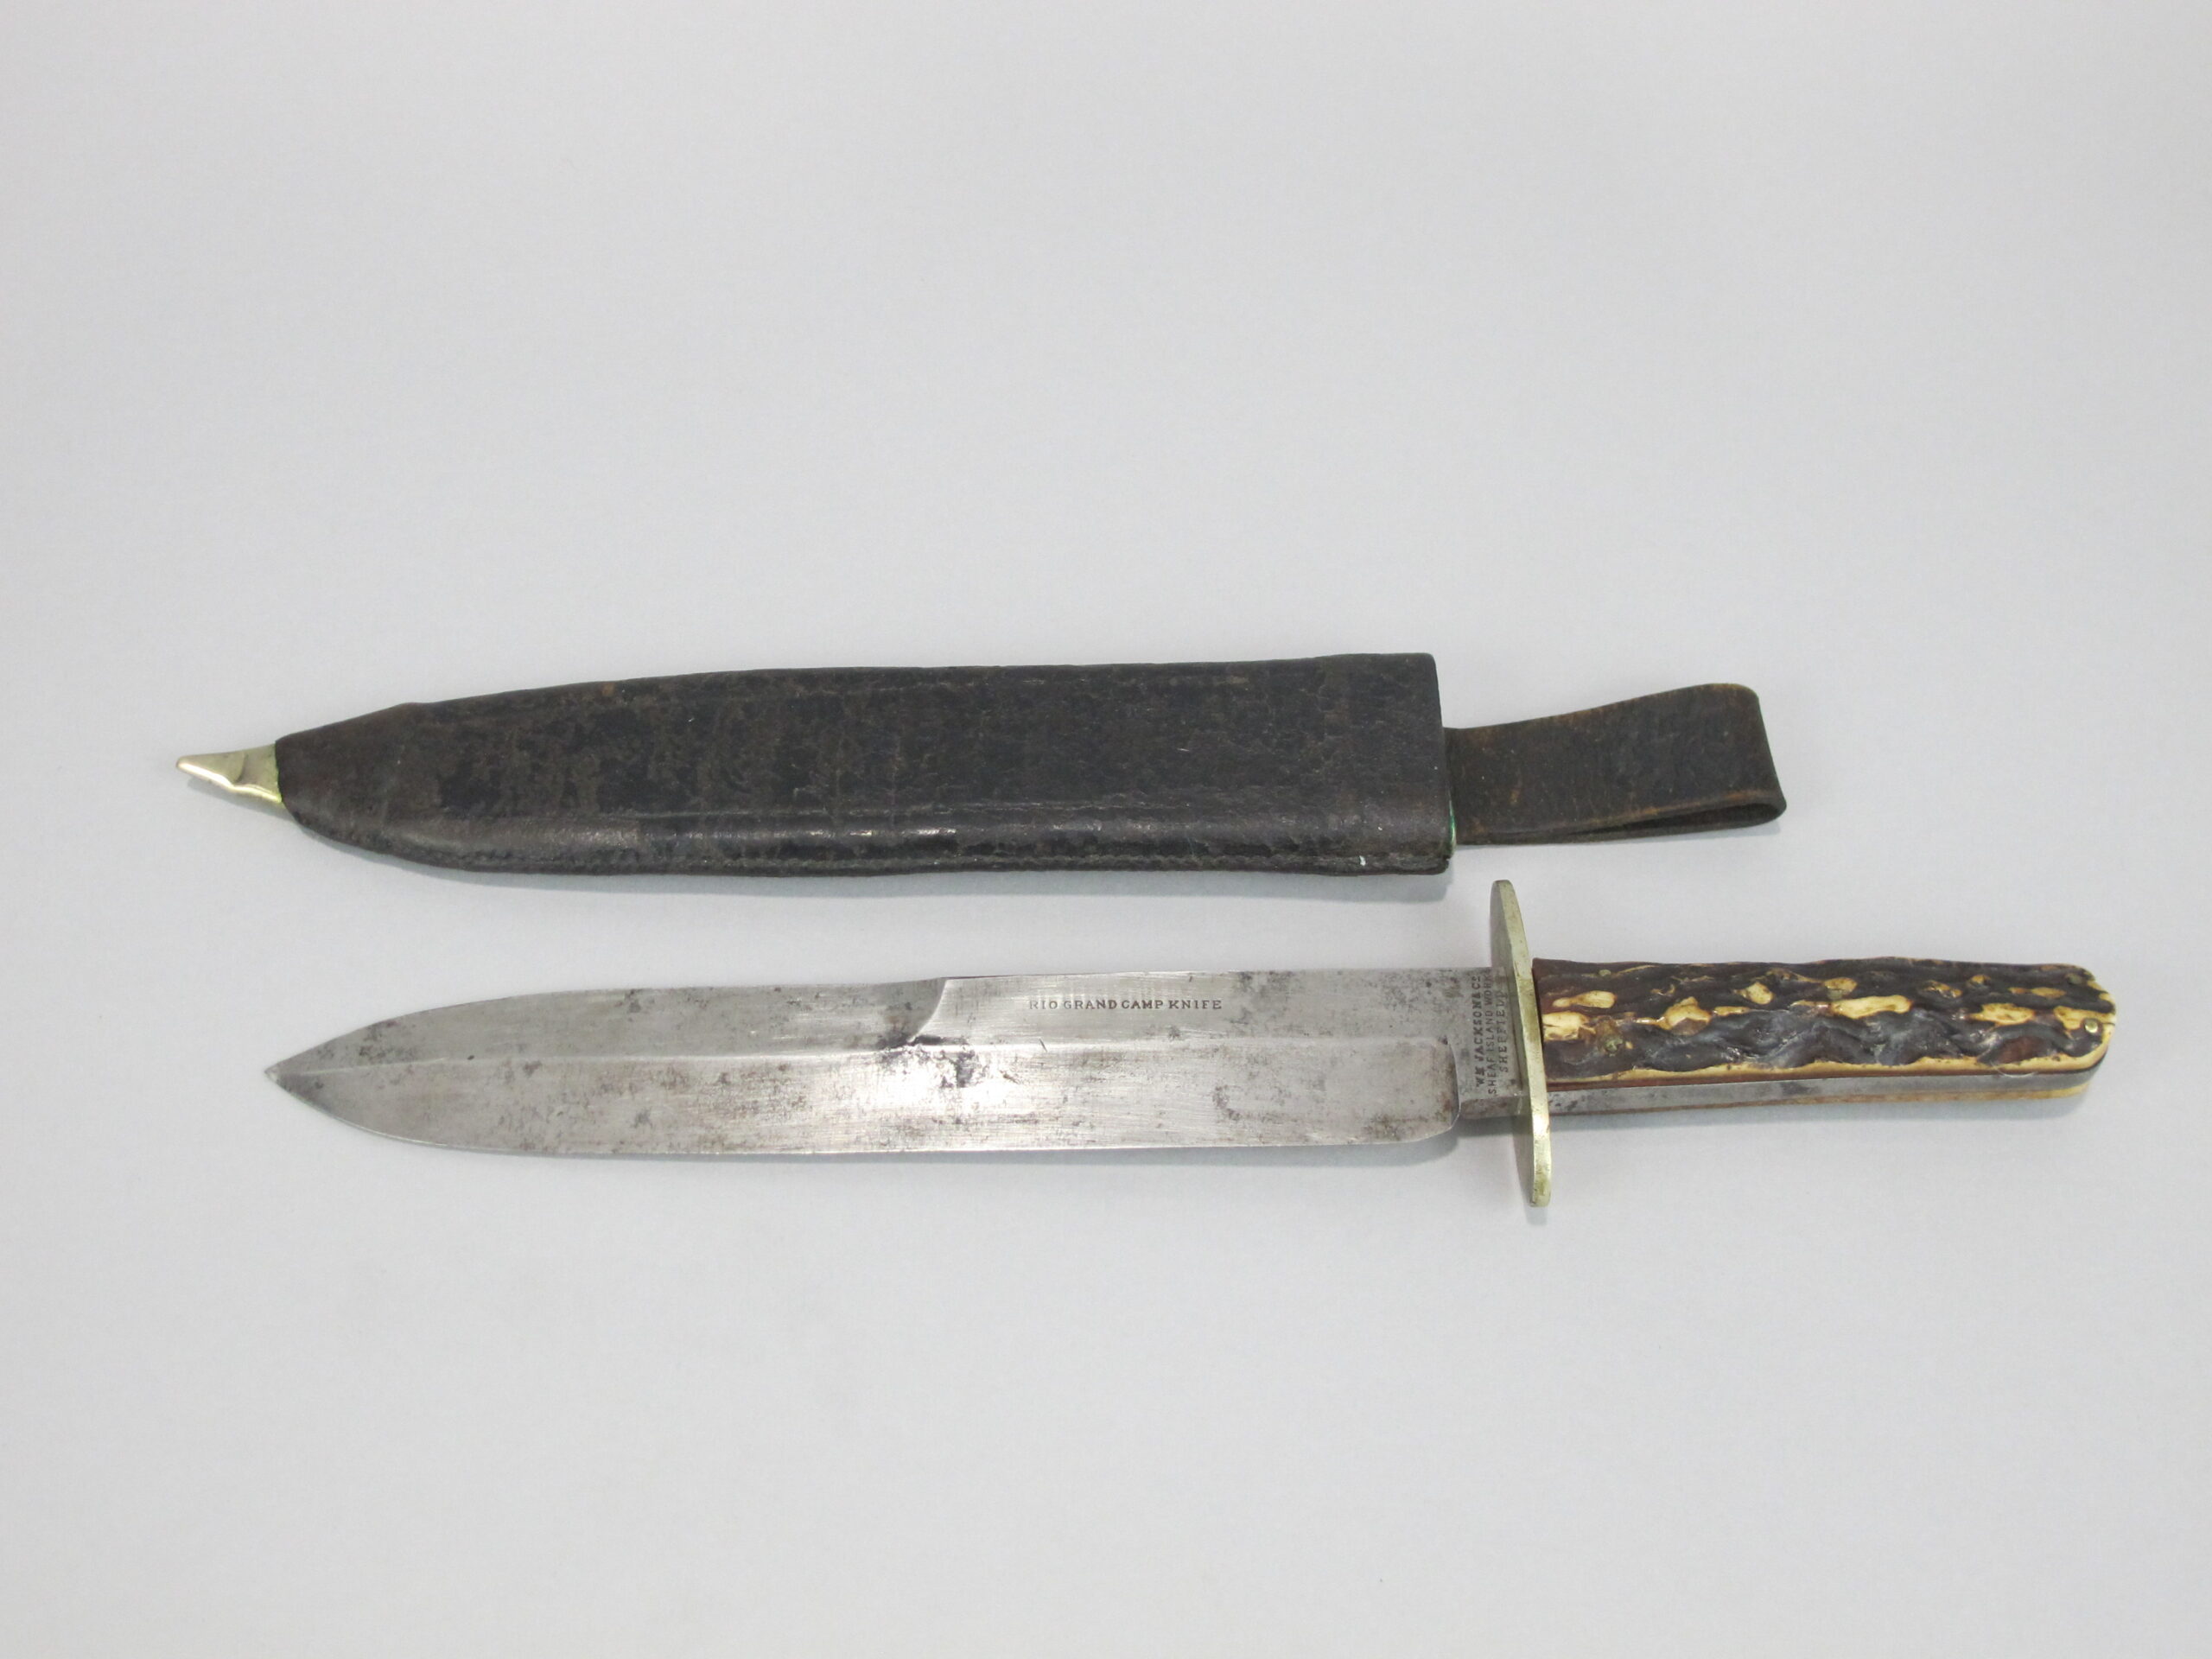 Photograph of an old knife and its sheath.